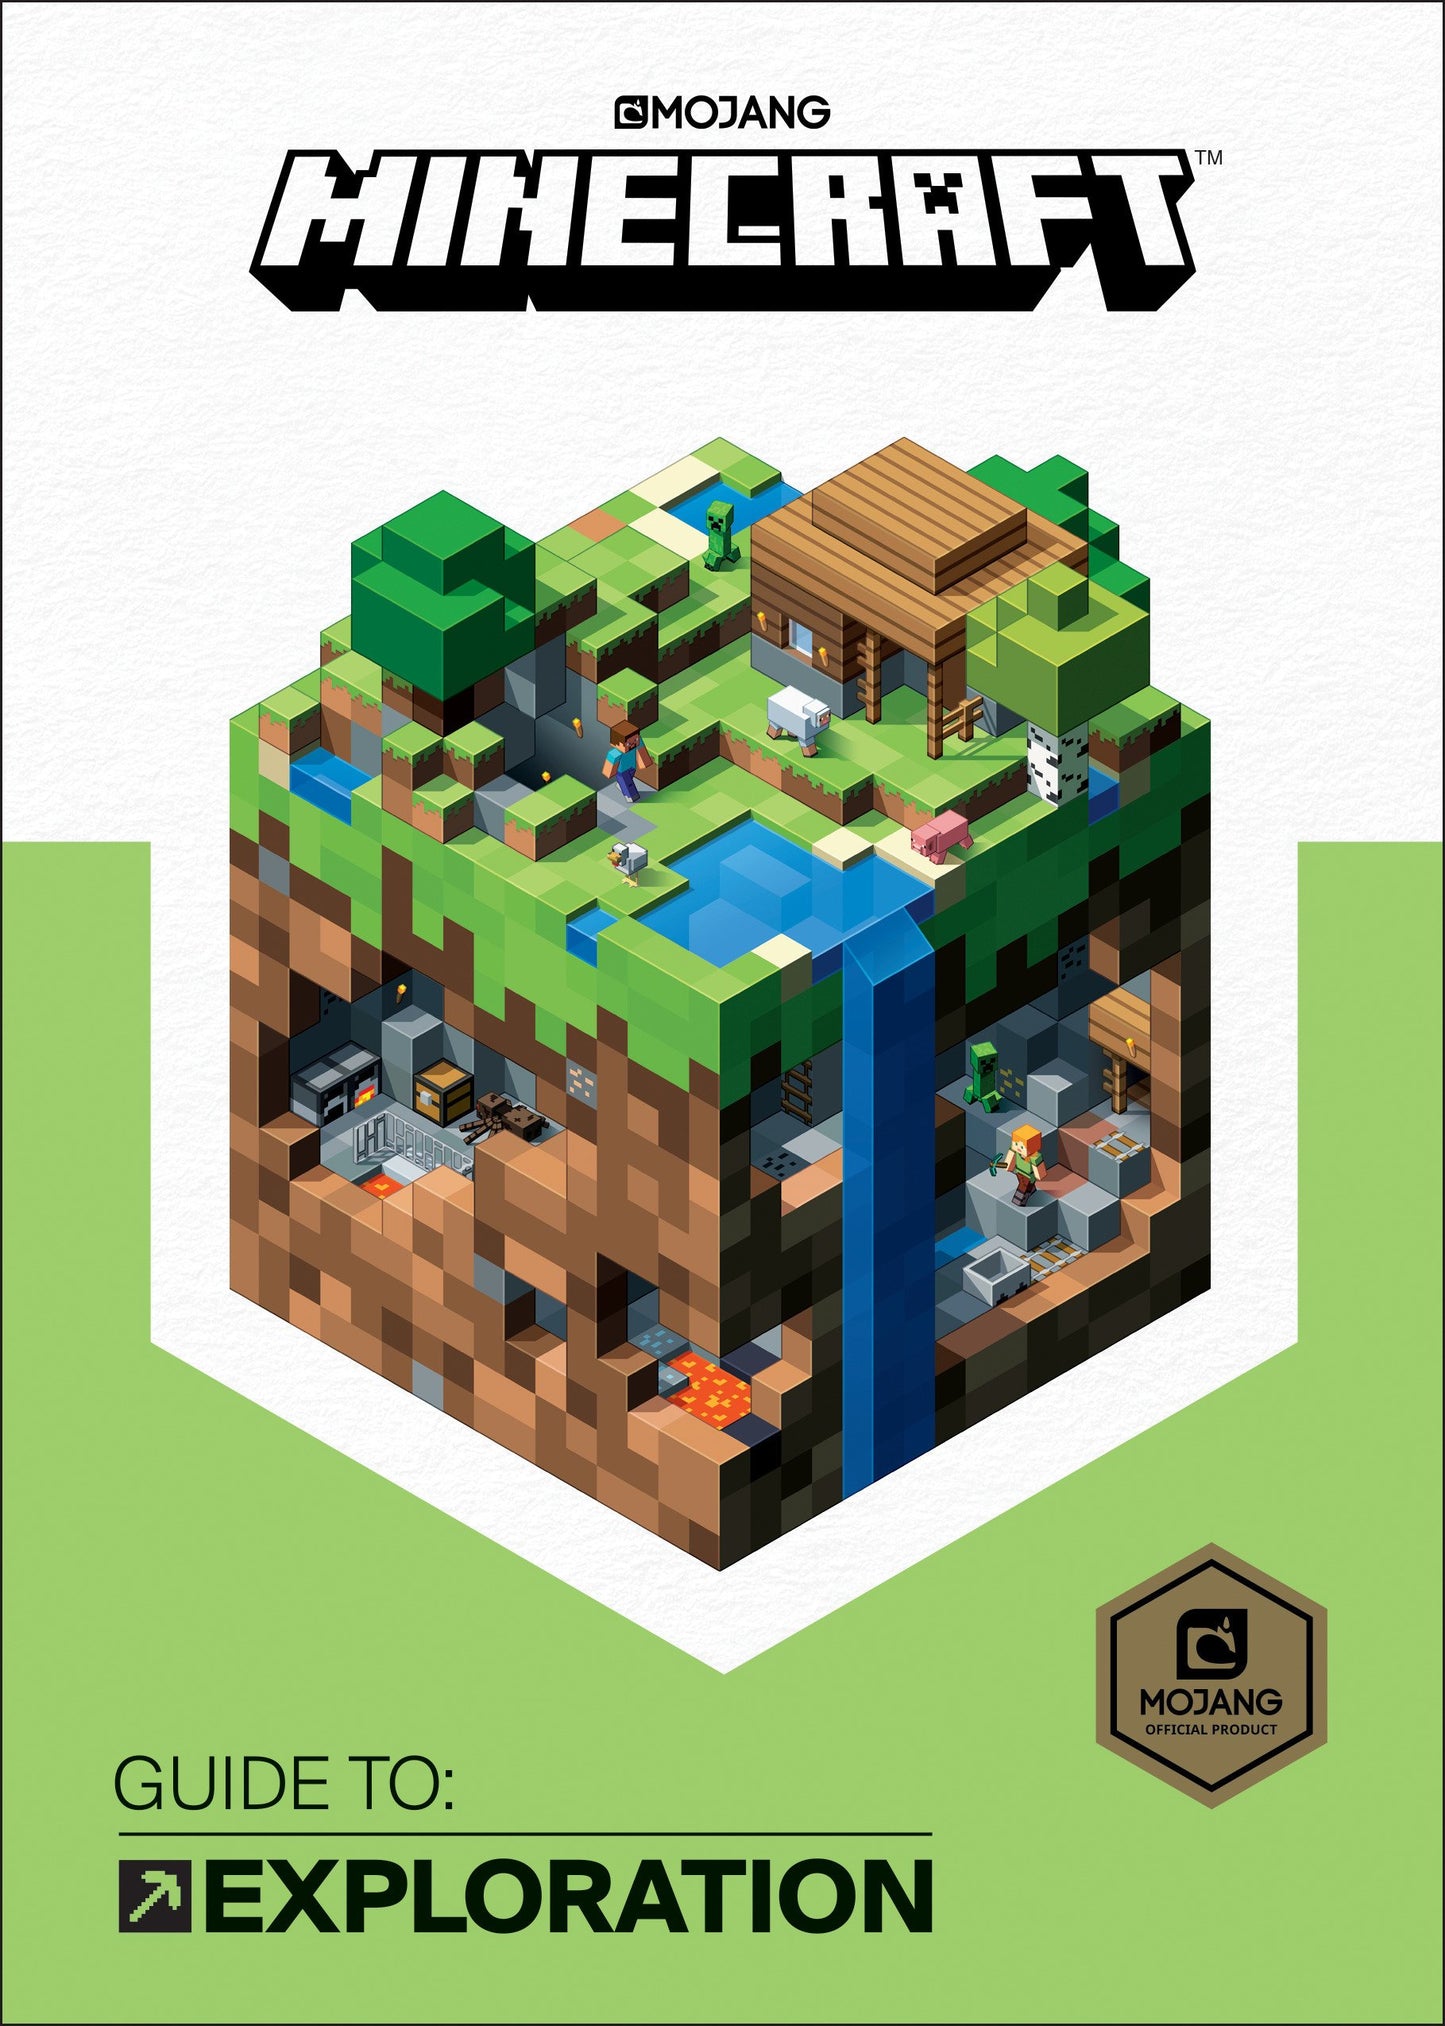 The Official Mojang MINECRAFT GUIDE TO EXPLORATION